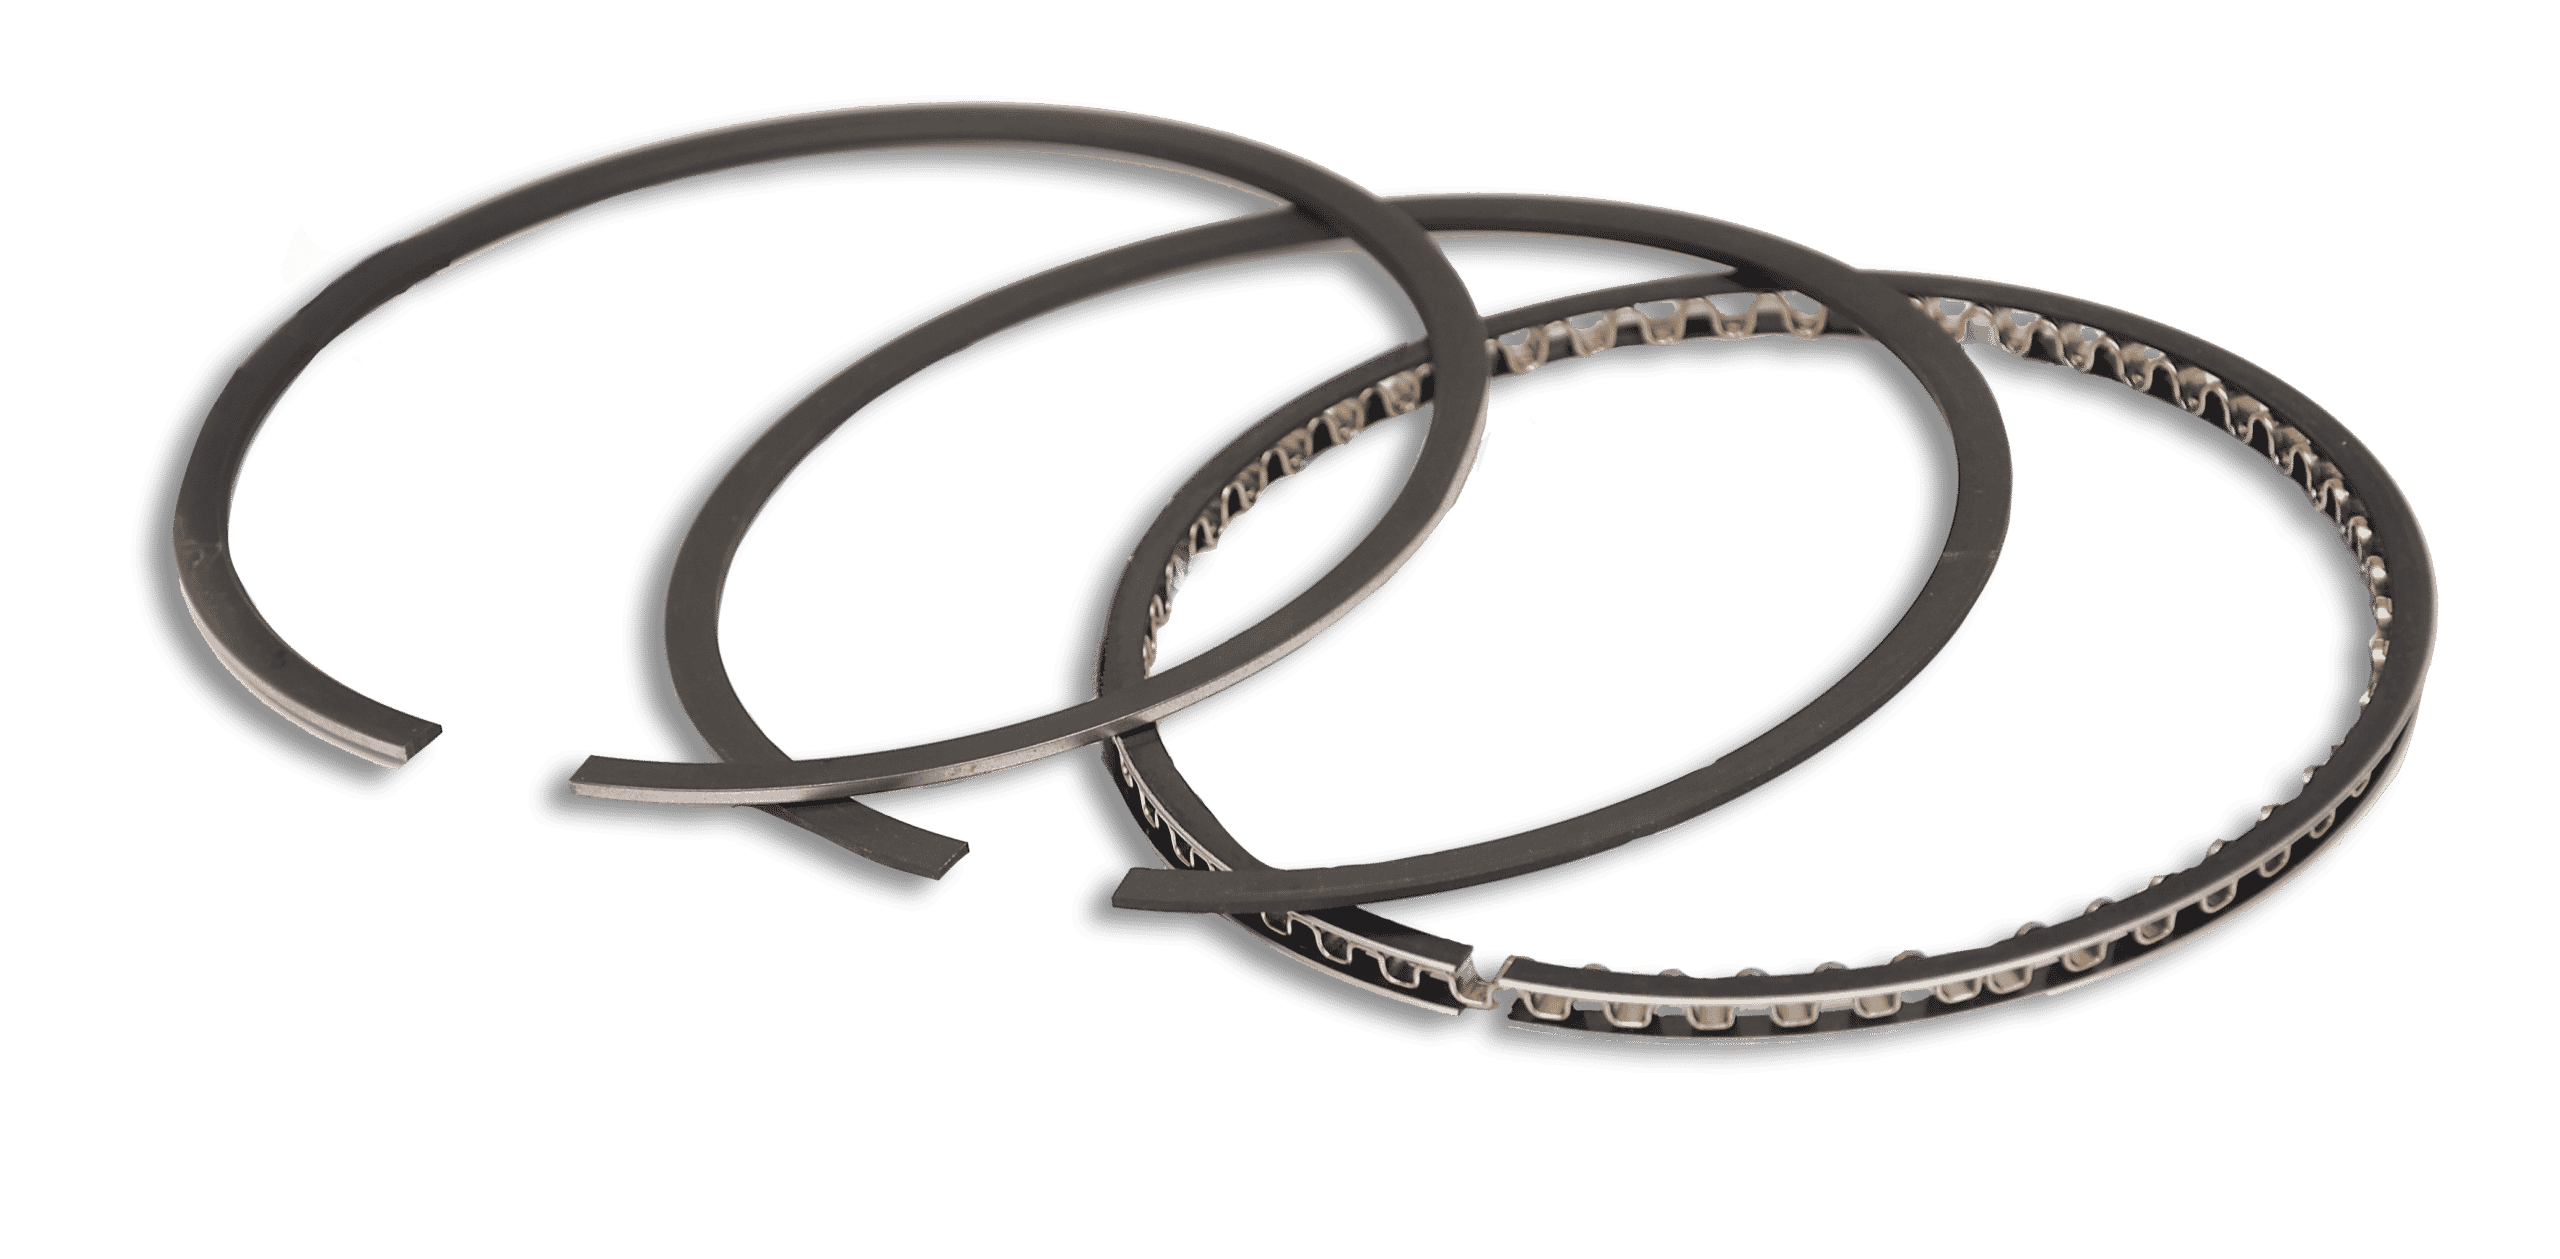 What is Piston Rings | Types of Piston Rings? | by Technical Education |  Medium